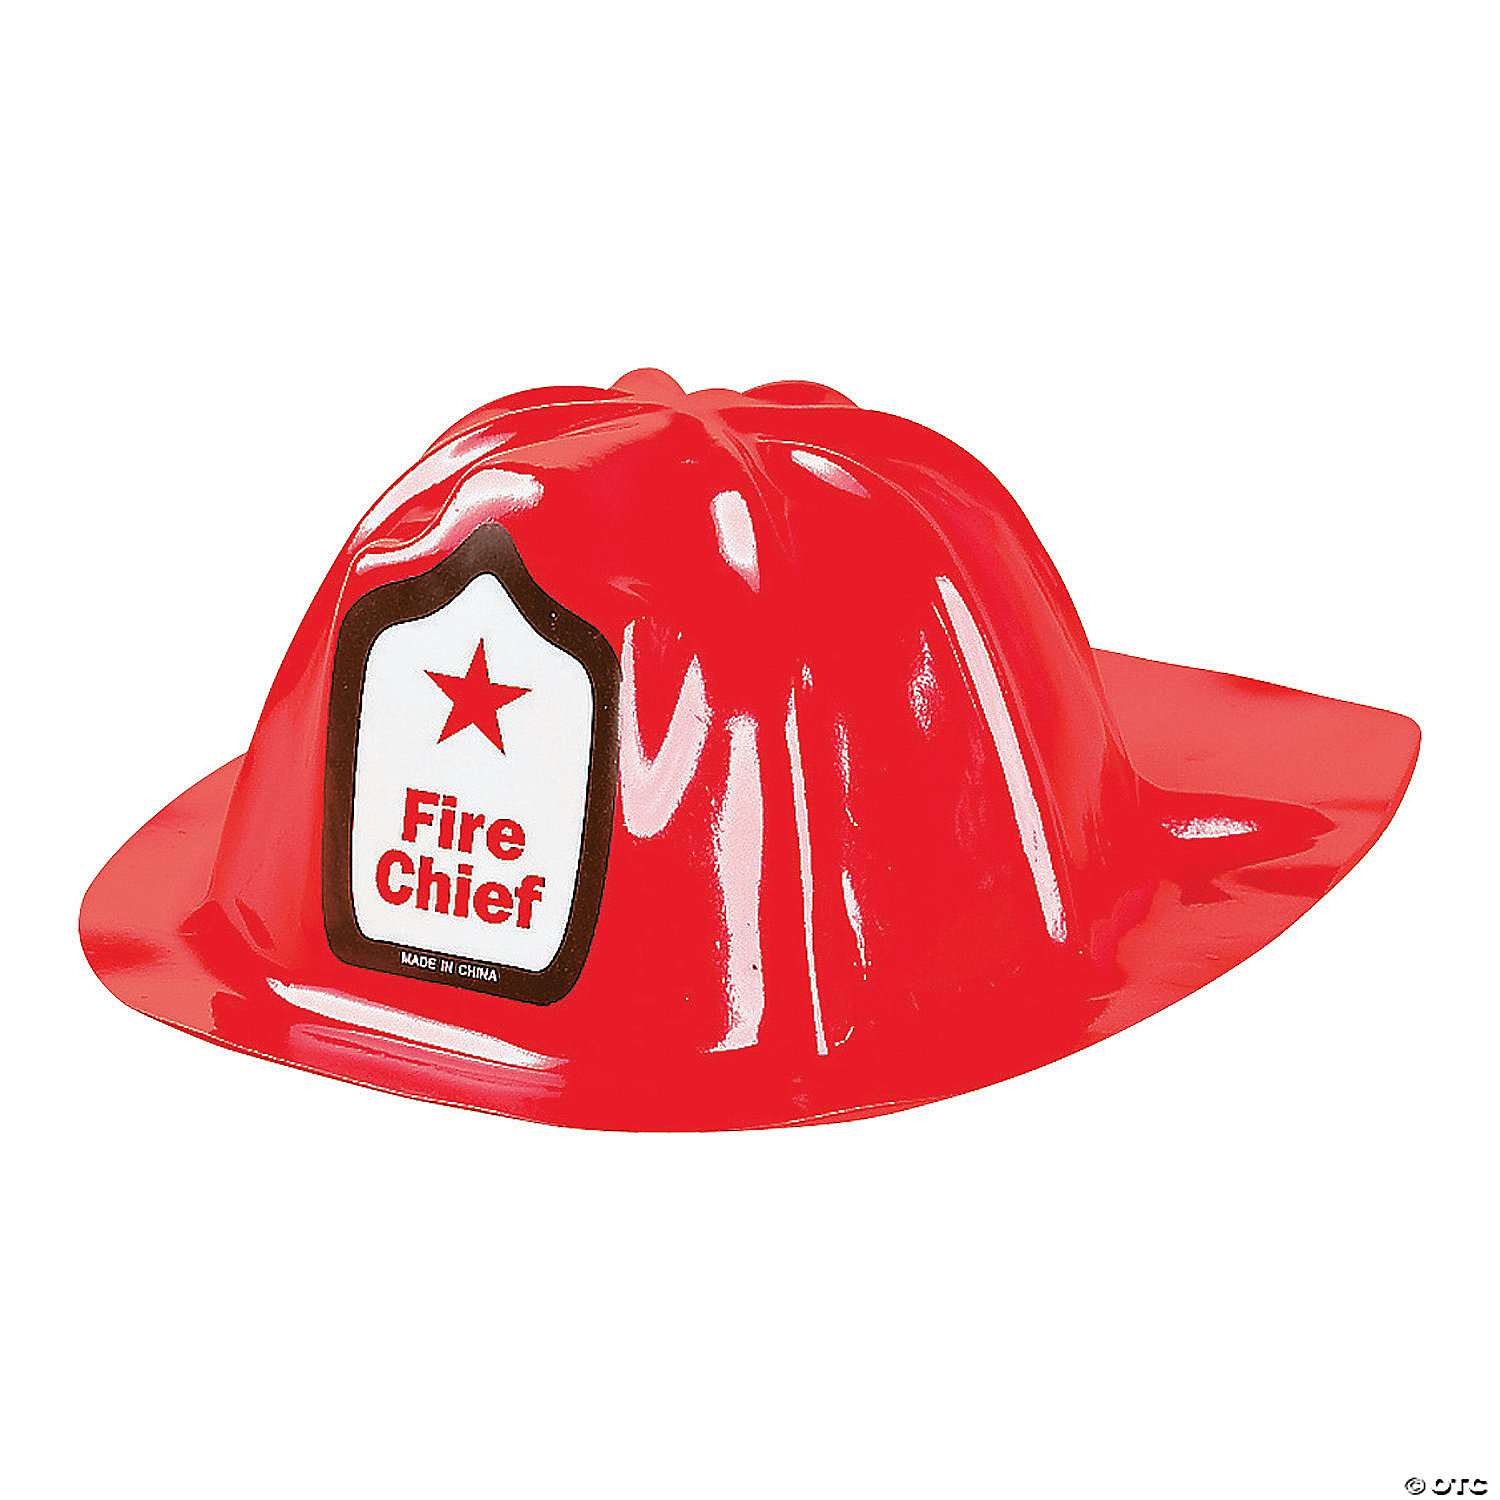 Gifts Kidsco Red Fire Chief Firefighter Hat Cool and Fun Child Size Classic Fireman Hat Parties Halloween Costumes 12 Fireman Hats Theme Party Favor Holidays Toys Kayco USA 